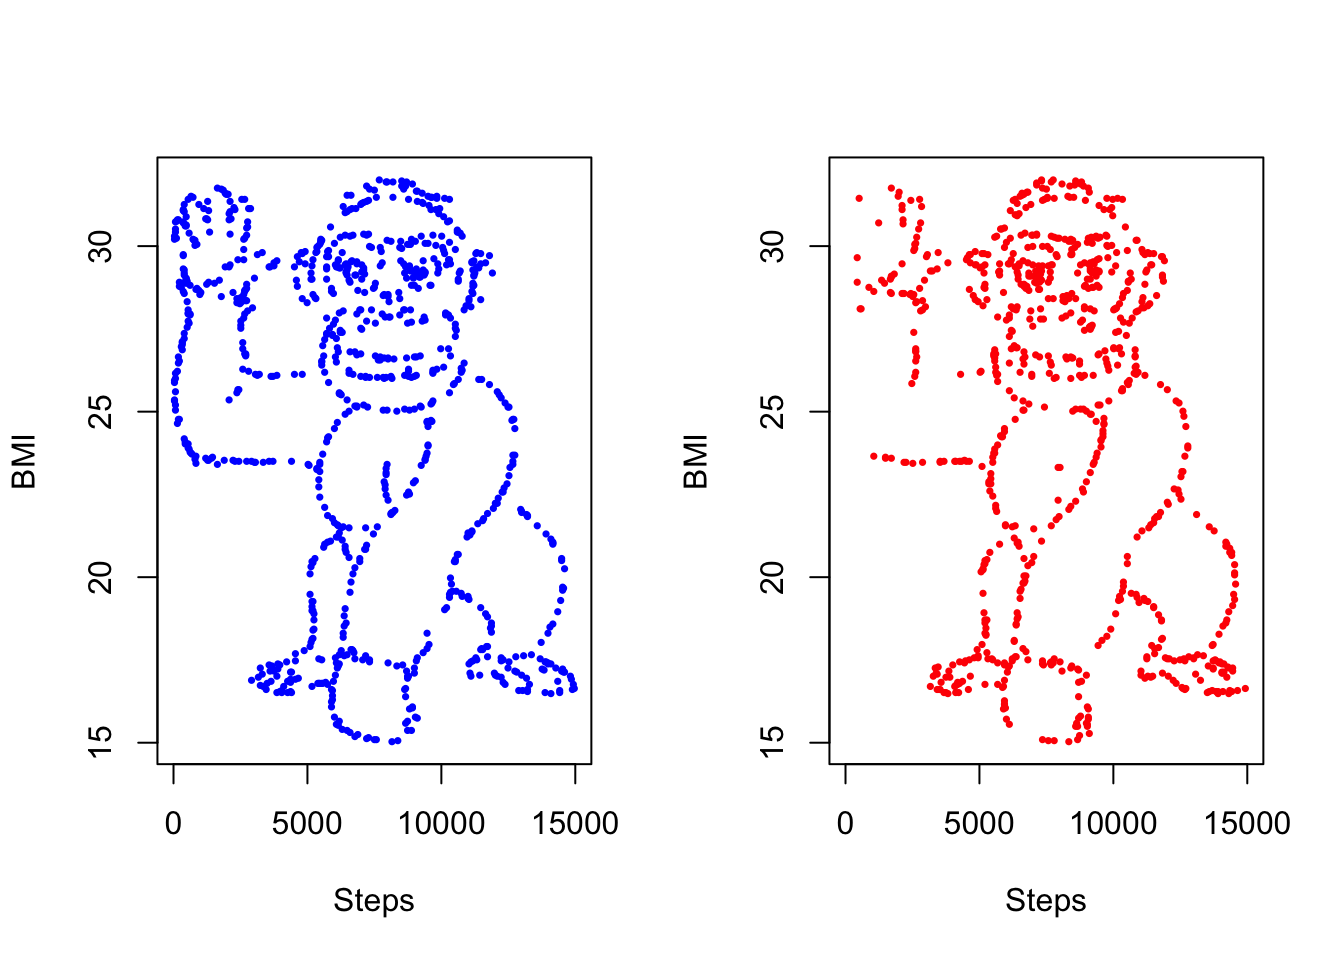 Two side-by-side plots of steps (x) against BMI (y) where both sets of datapoints look like a cartoon gorilla waving.